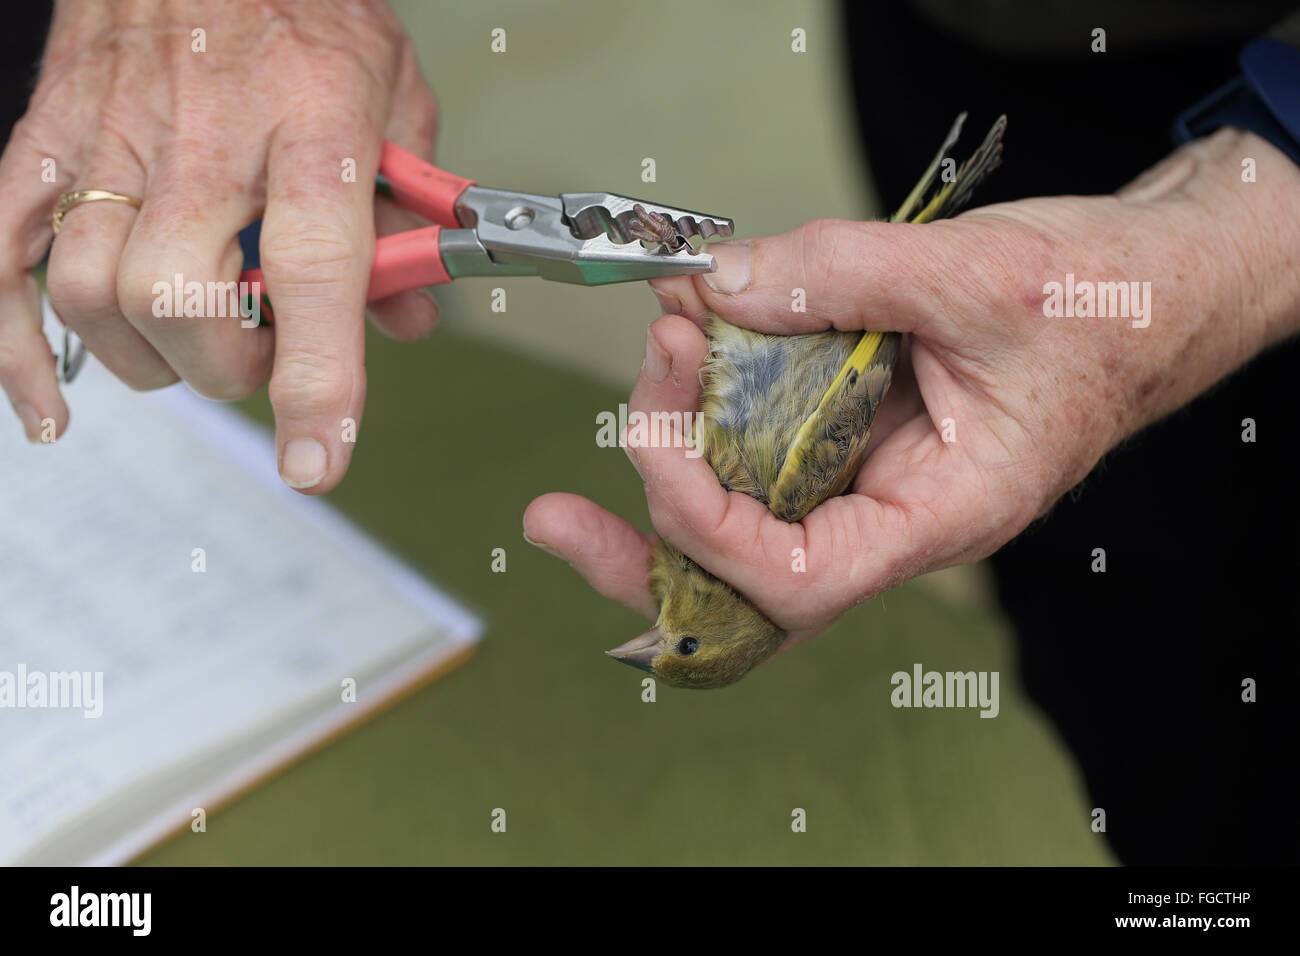 European Greenfinch (Carduelis chloris) adult male, leg being fitted with metal ring by bird ringer, Isle of Wight, England, August Stock Photo